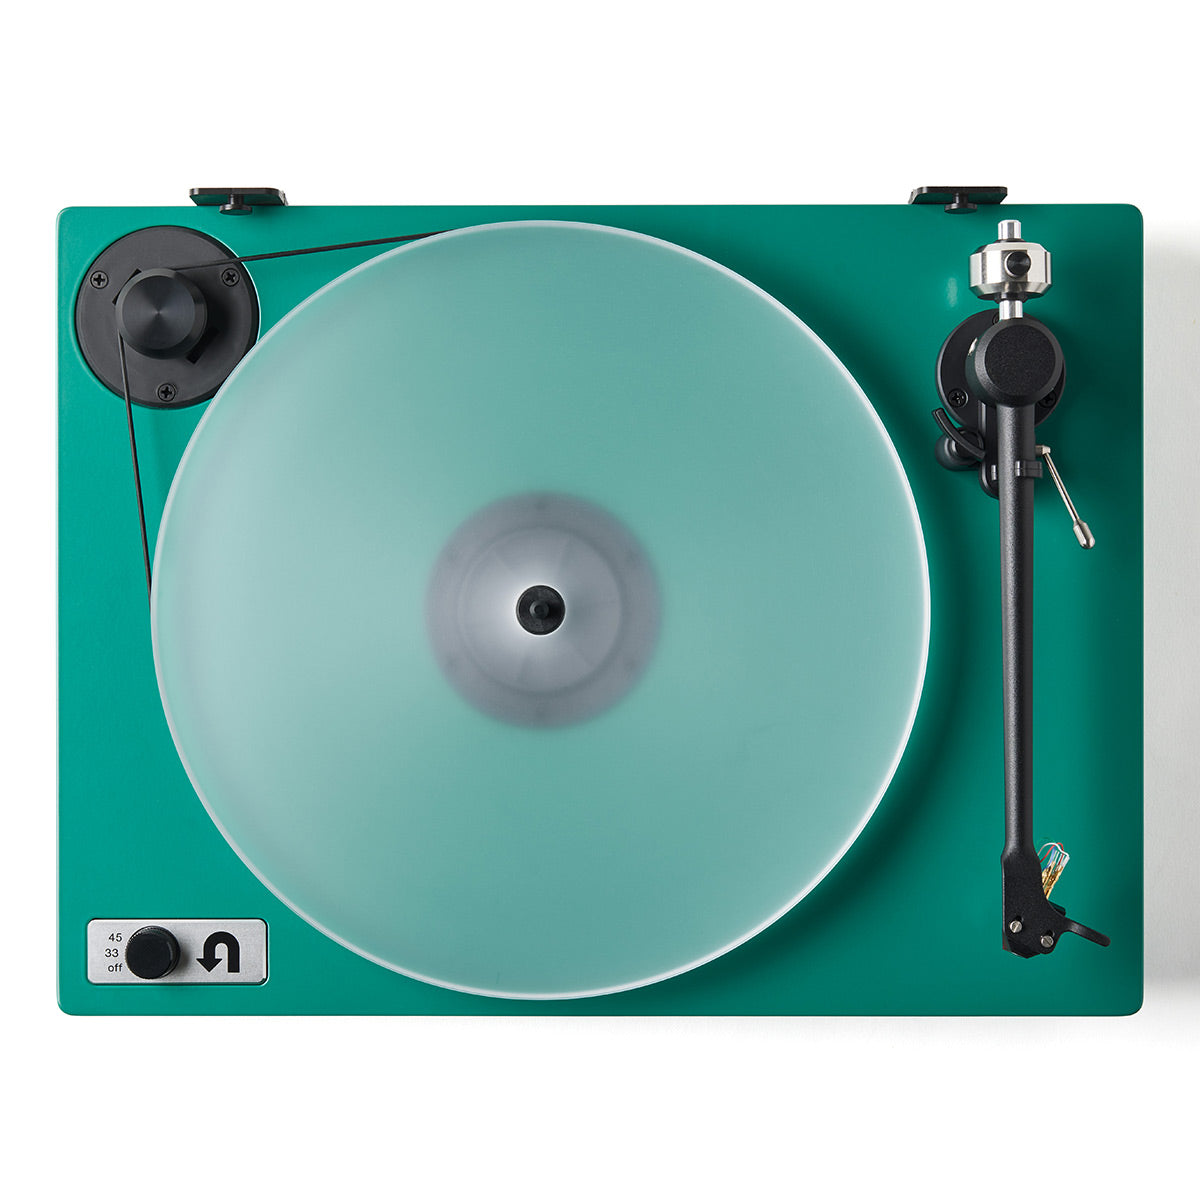 U-Turn Audio Orbit 2 Special Turntable with Built-In Preamp and Ortofon 2M Red Cartridge (Green)